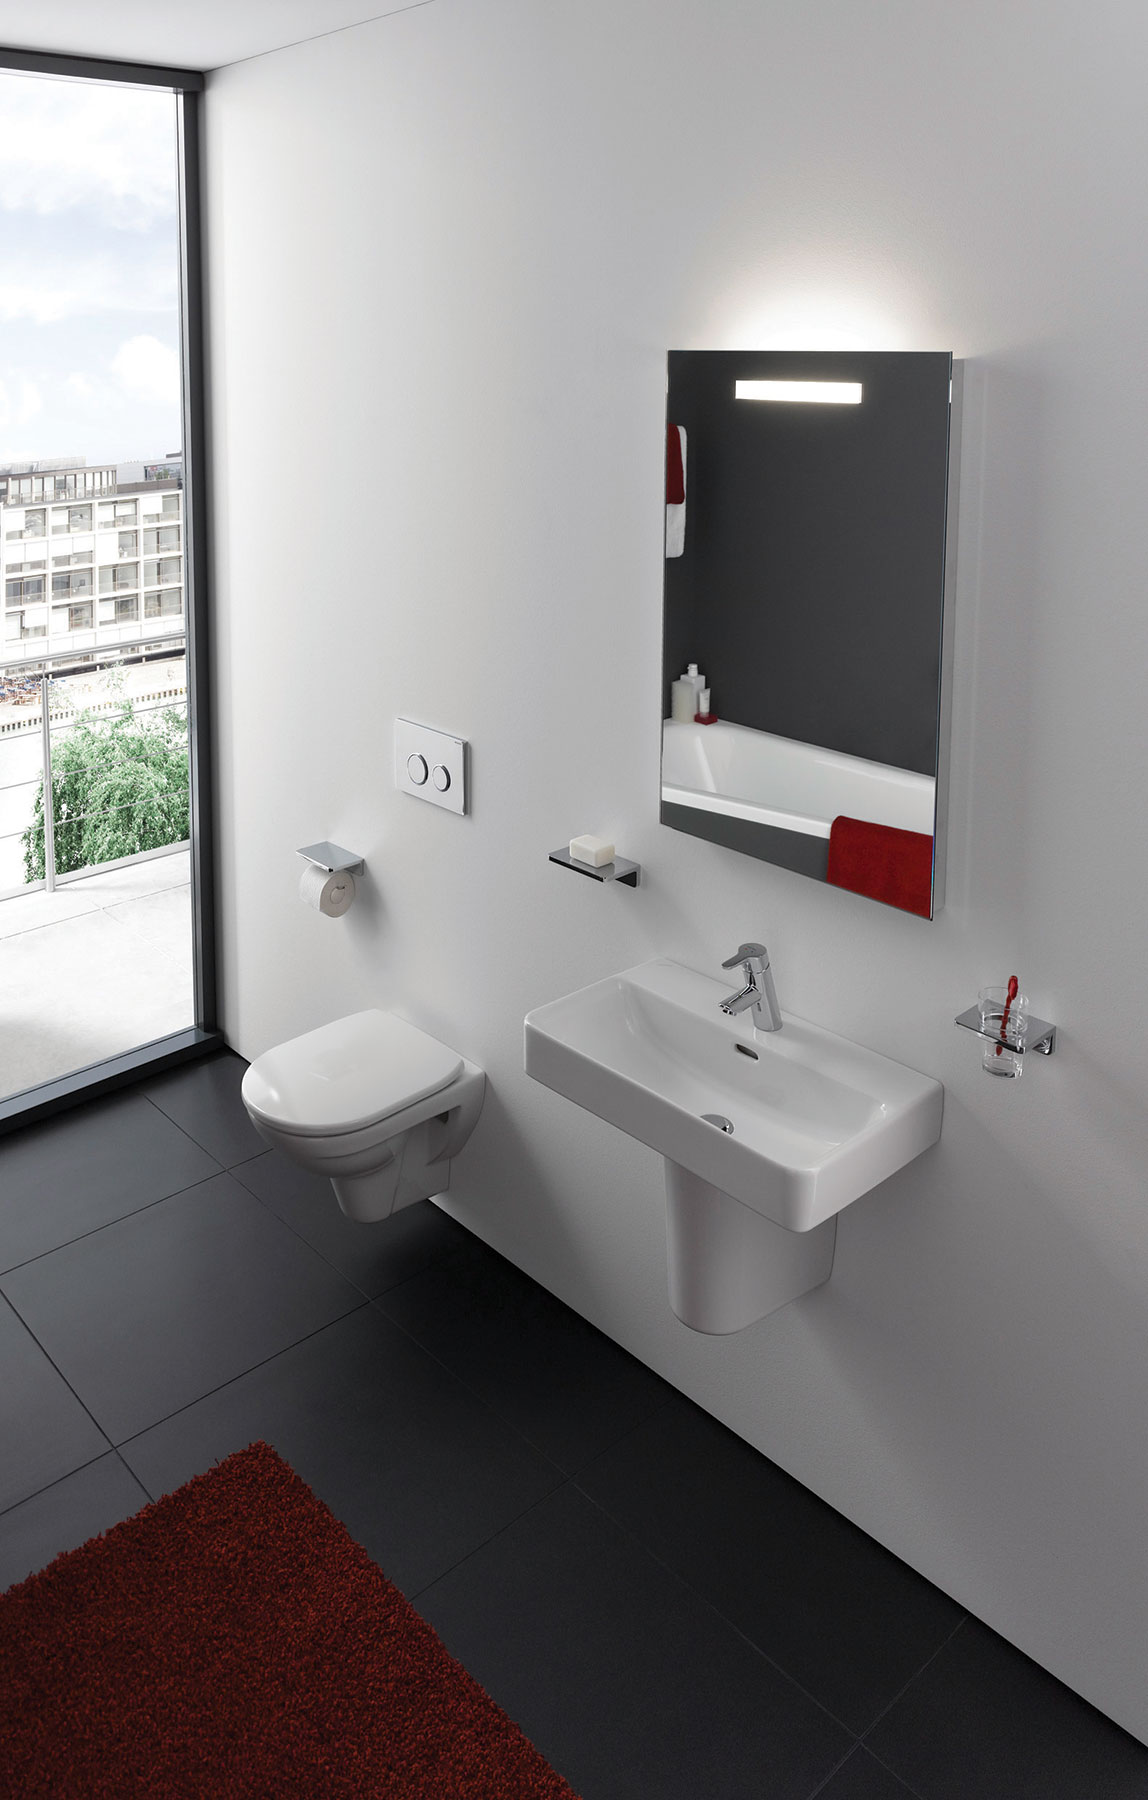 Modern Pro Wall Mount Toilet first image